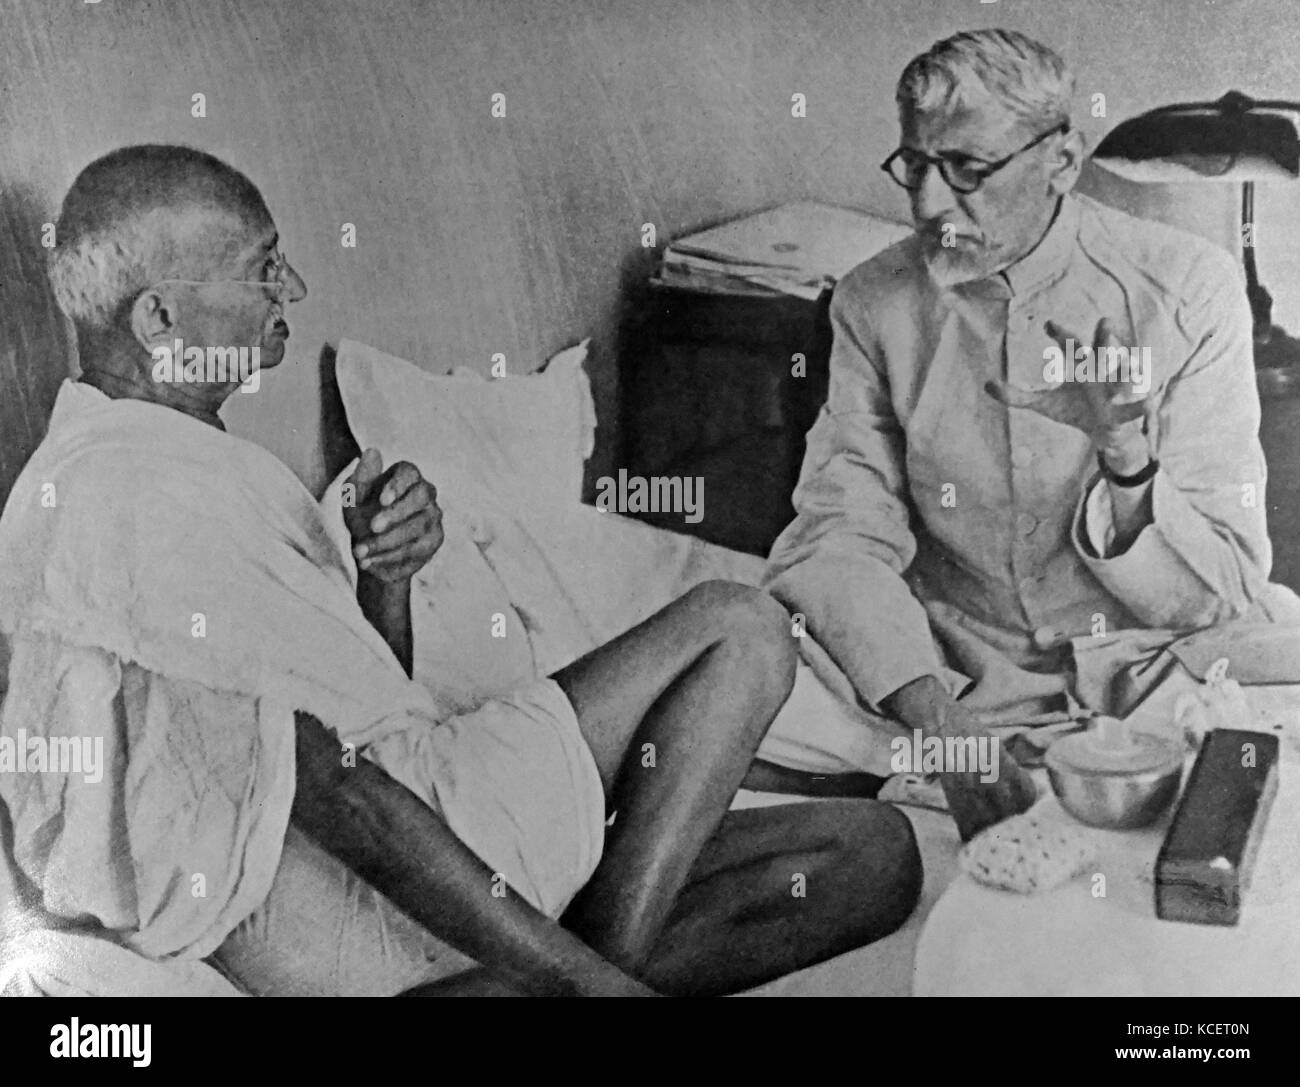 Mohandas Karamchand Gandhi with Maulana Azad (Moslem, Congress party official) 1947. Gandhi (2 October 1869 – 30 January 1948), was the preeminent leader of the Indian independence movement in British-ruled India. Stock Photo